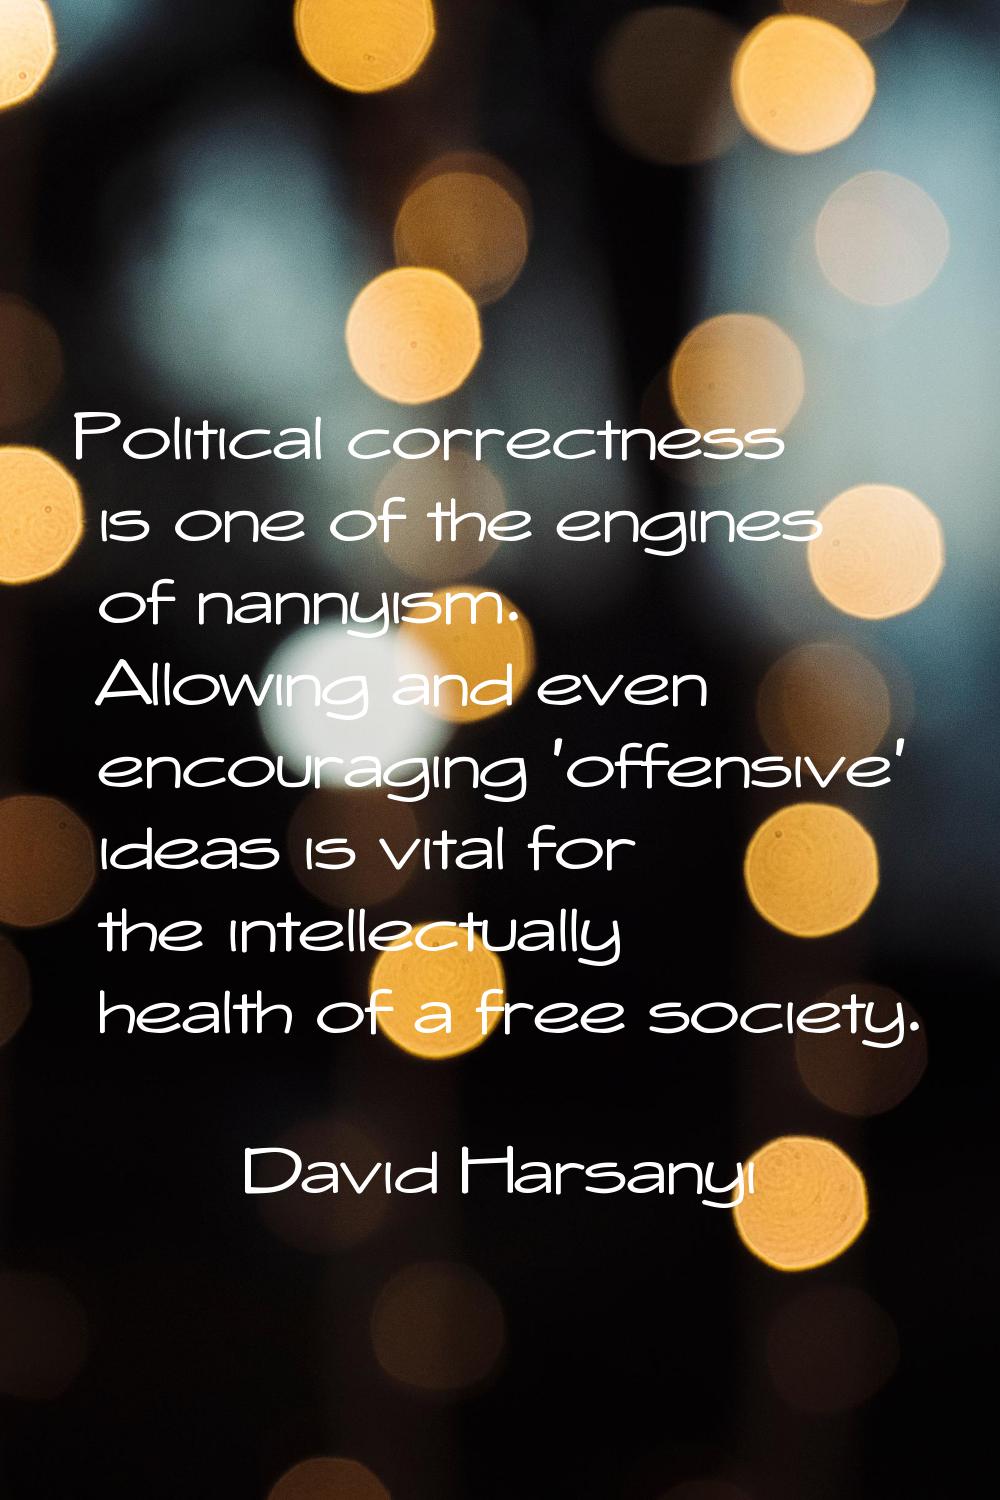 Political correctness is one of the engines of nannyism. Allowing and even encouraging 'offensive' 